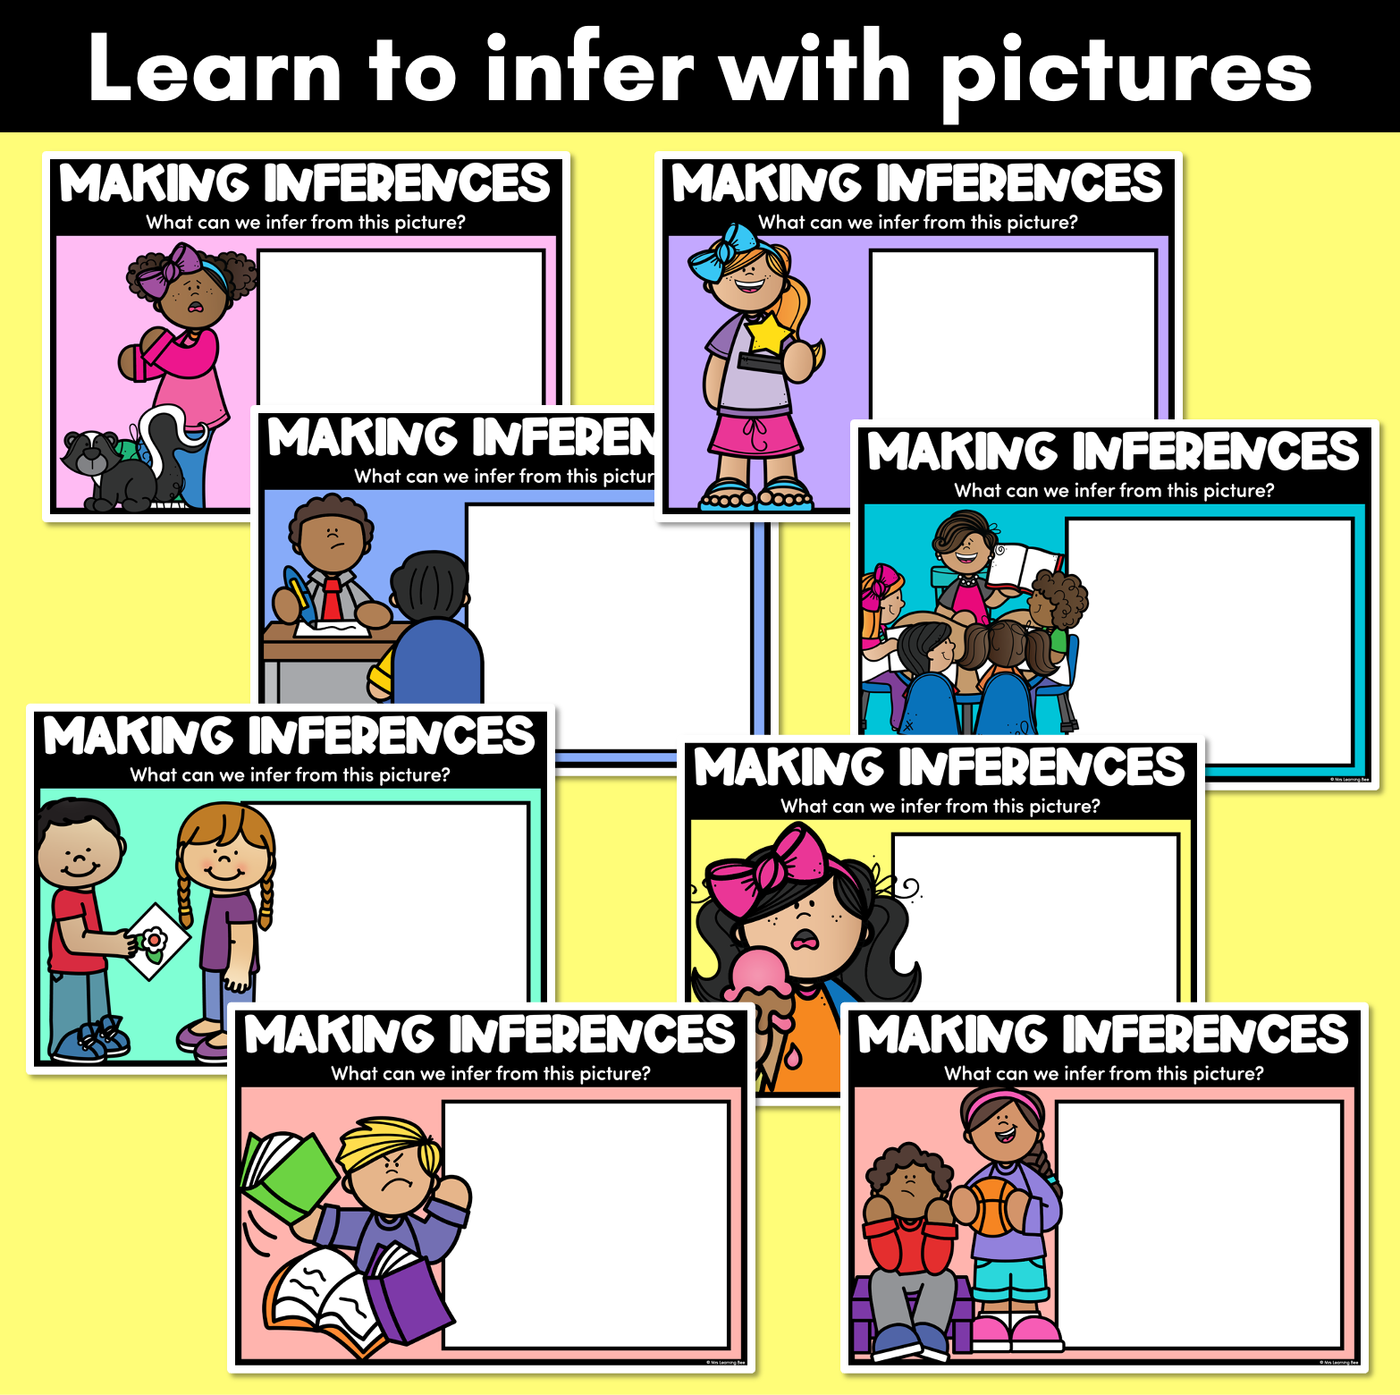 Making Inferences Prompts - Learning to Infer with Pictures, Photos & Text - PowerPoint